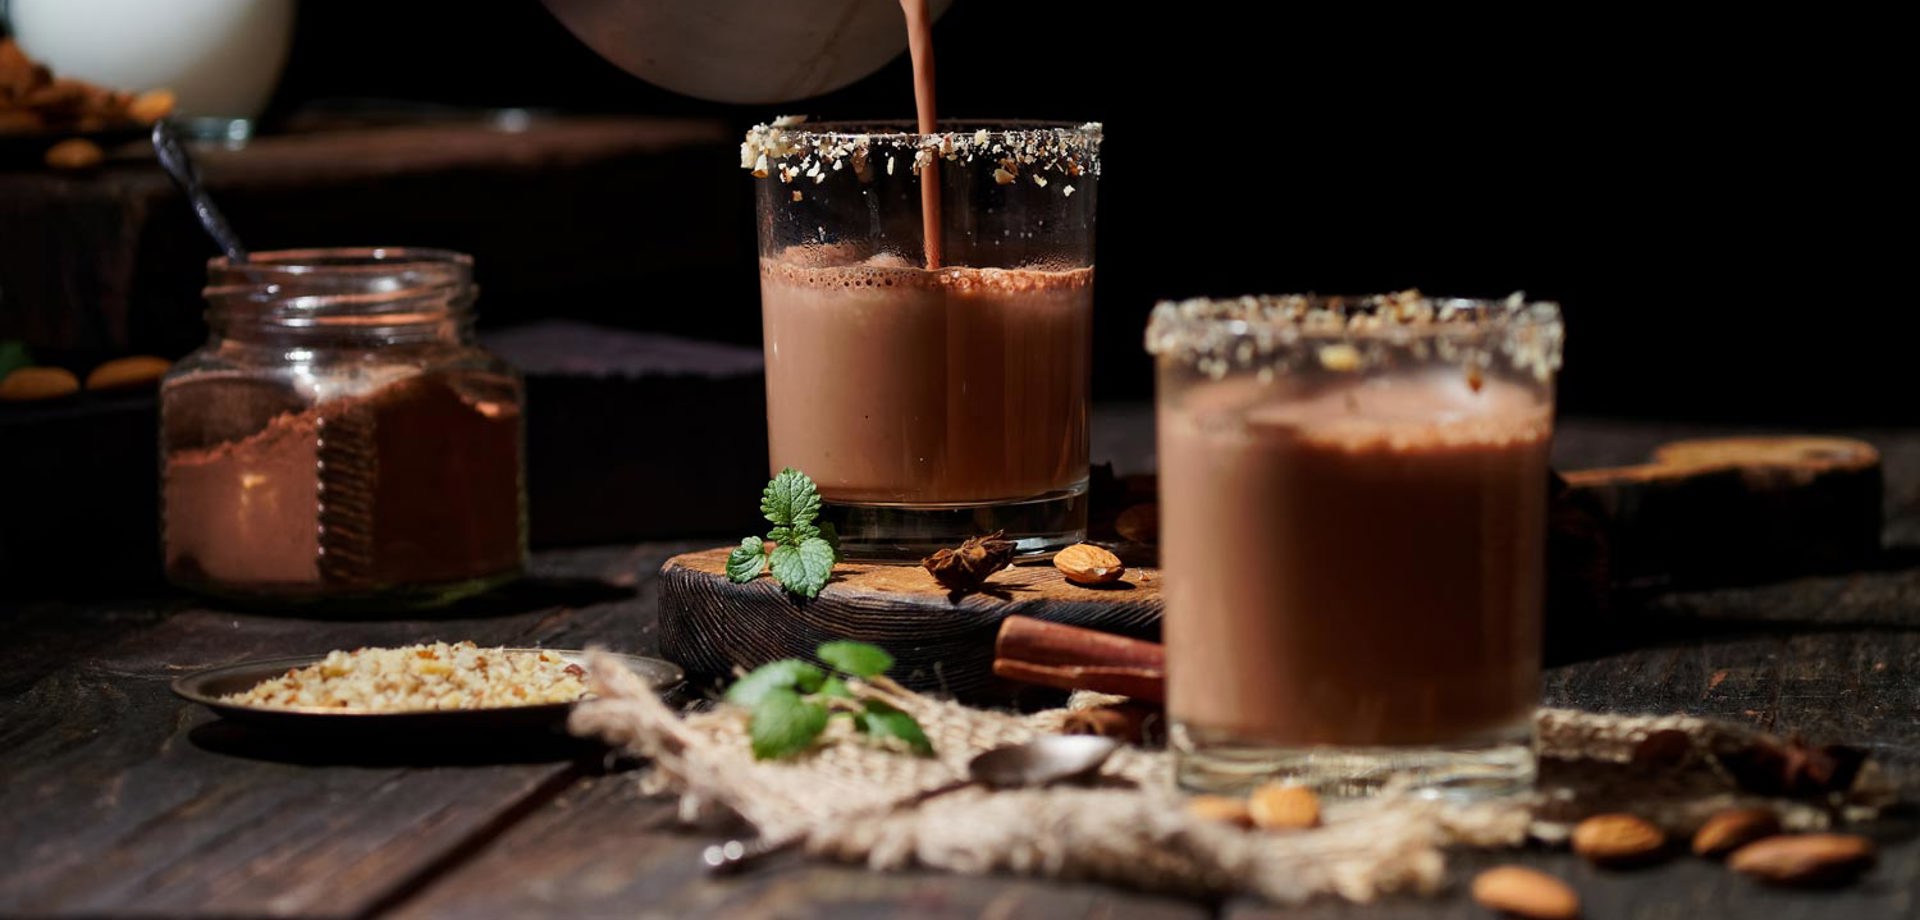 Two rocks glasses on a table filled with hot chocolate and garnished with crushed nuts around the rim of the glass. There is a hand out of shot pouring the chocolate into one of the glasses from a pan.